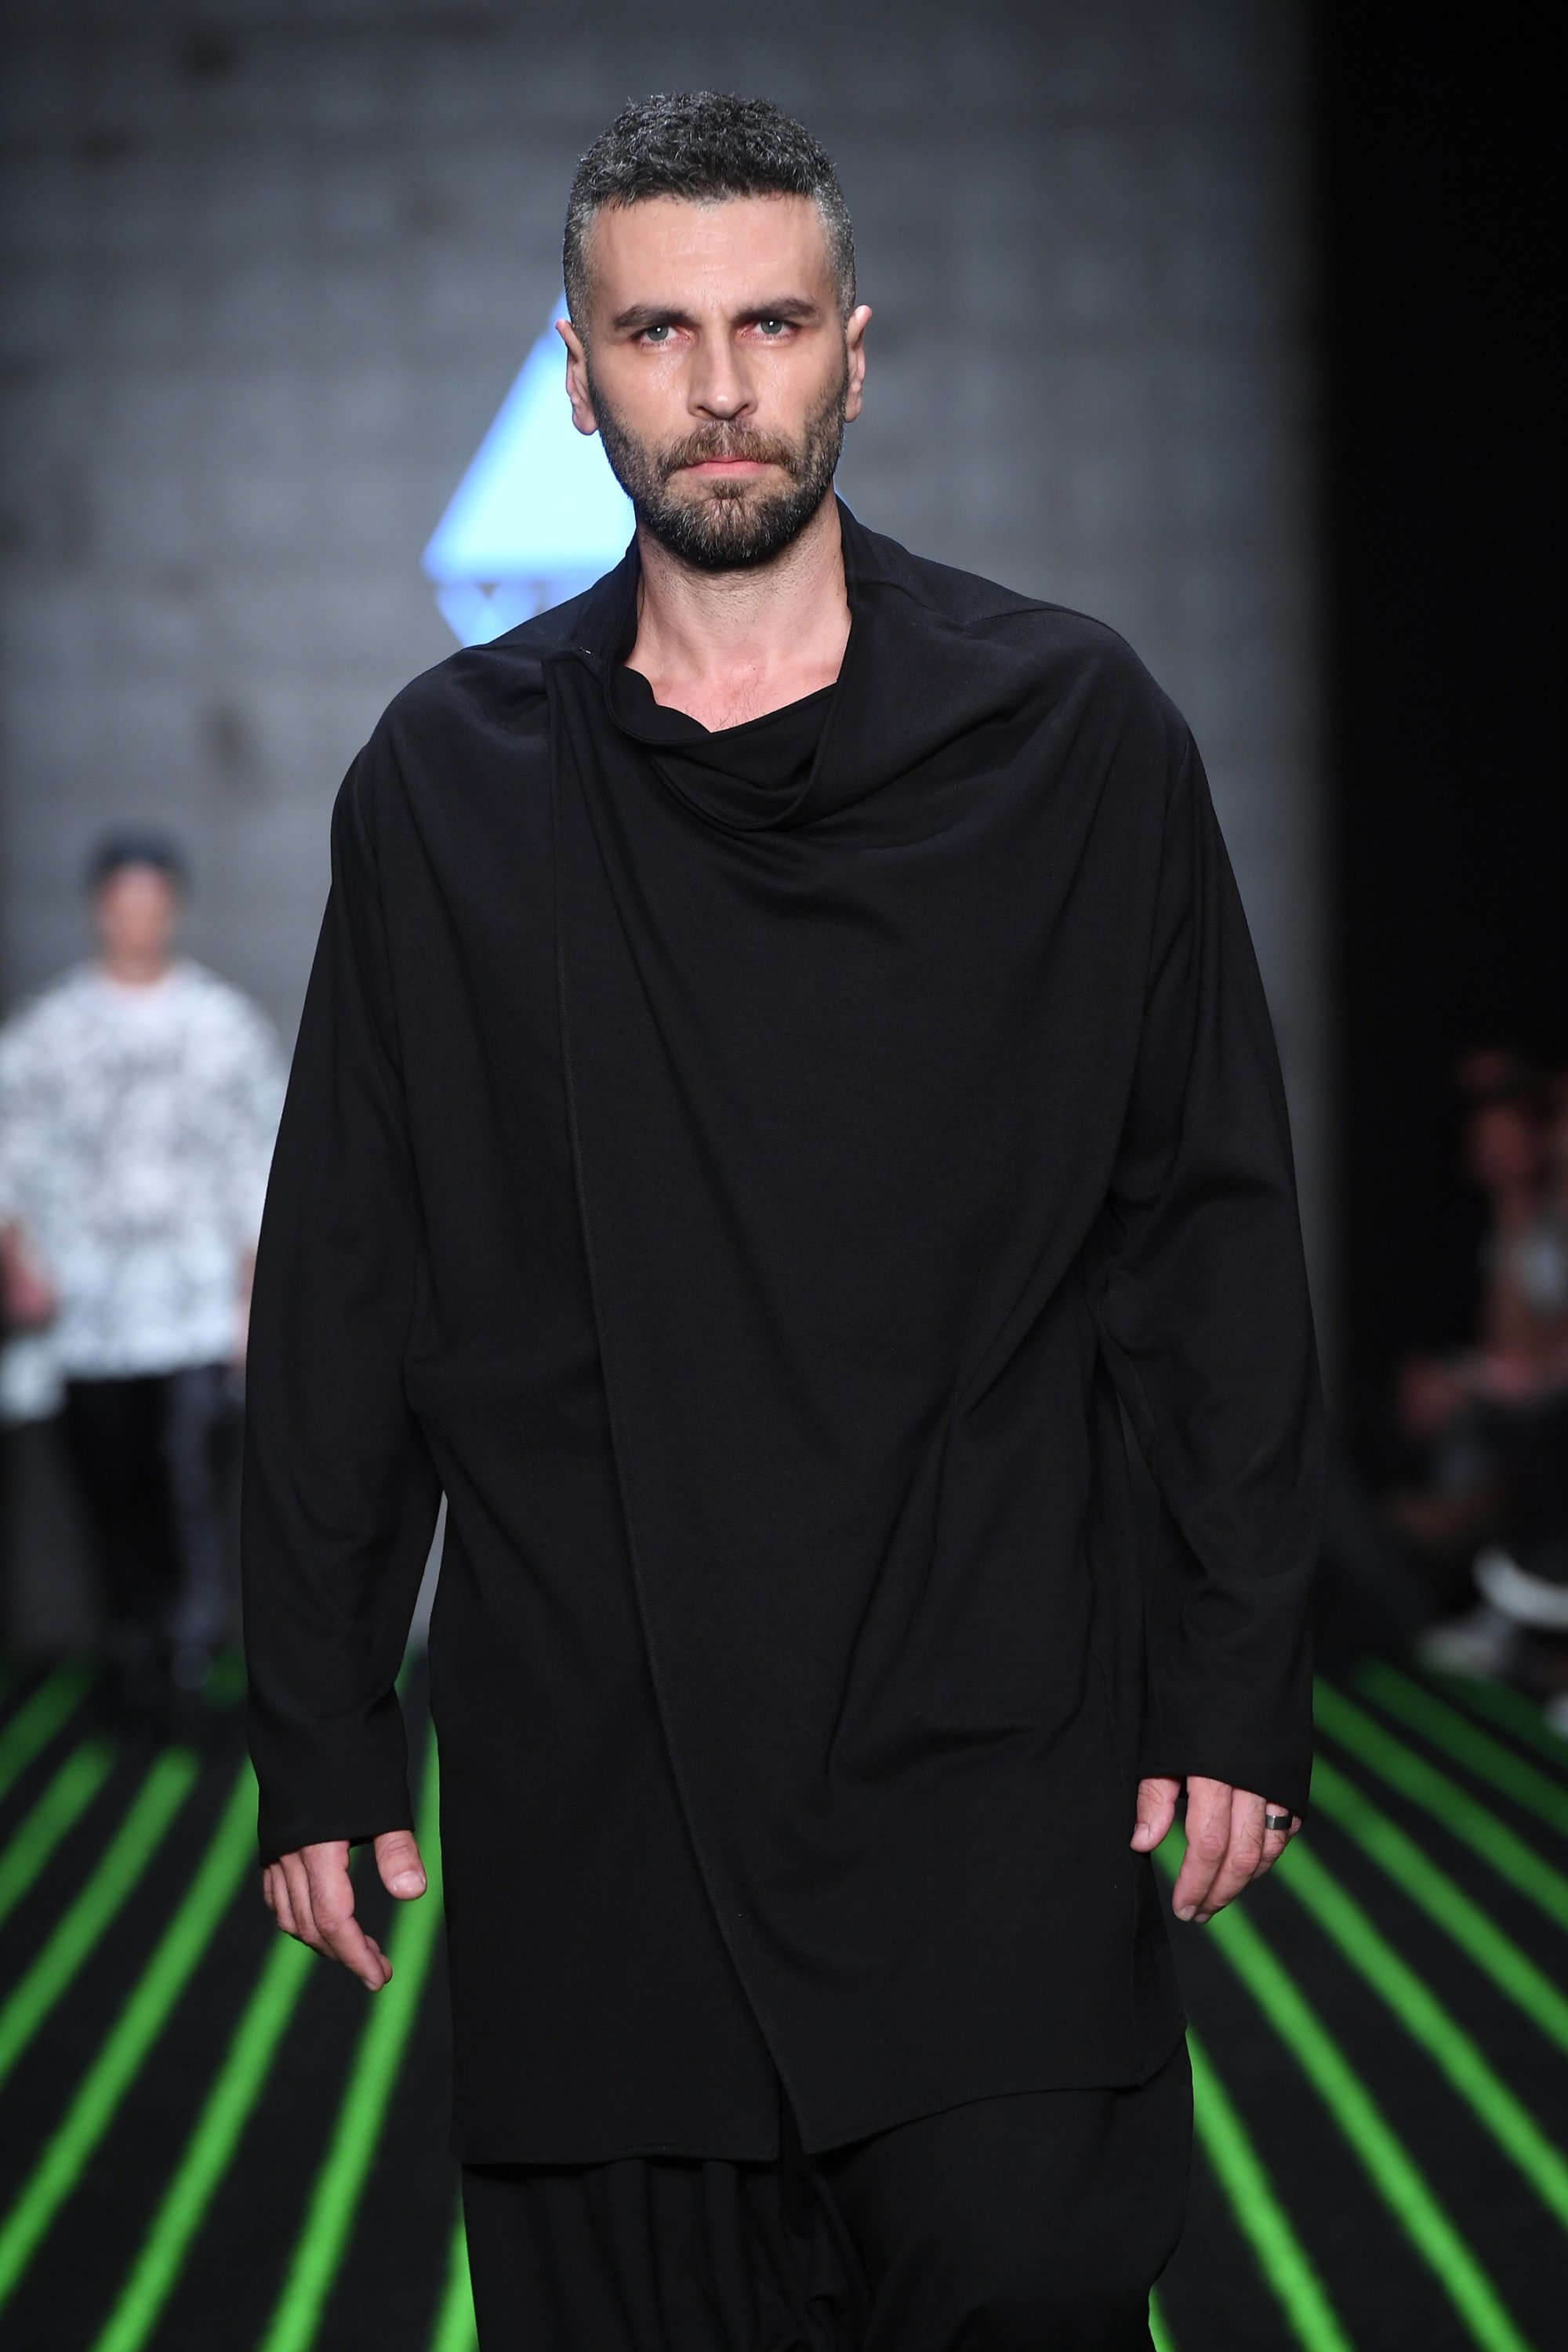 A model walks the runway during the Y Plus By Yakup Biçer show during Mercedes-Benz Istanbul Fashion Week at Zorlu Performance Hall on October 9, 2019 in Istanbul, Turkey. (Getty Images)